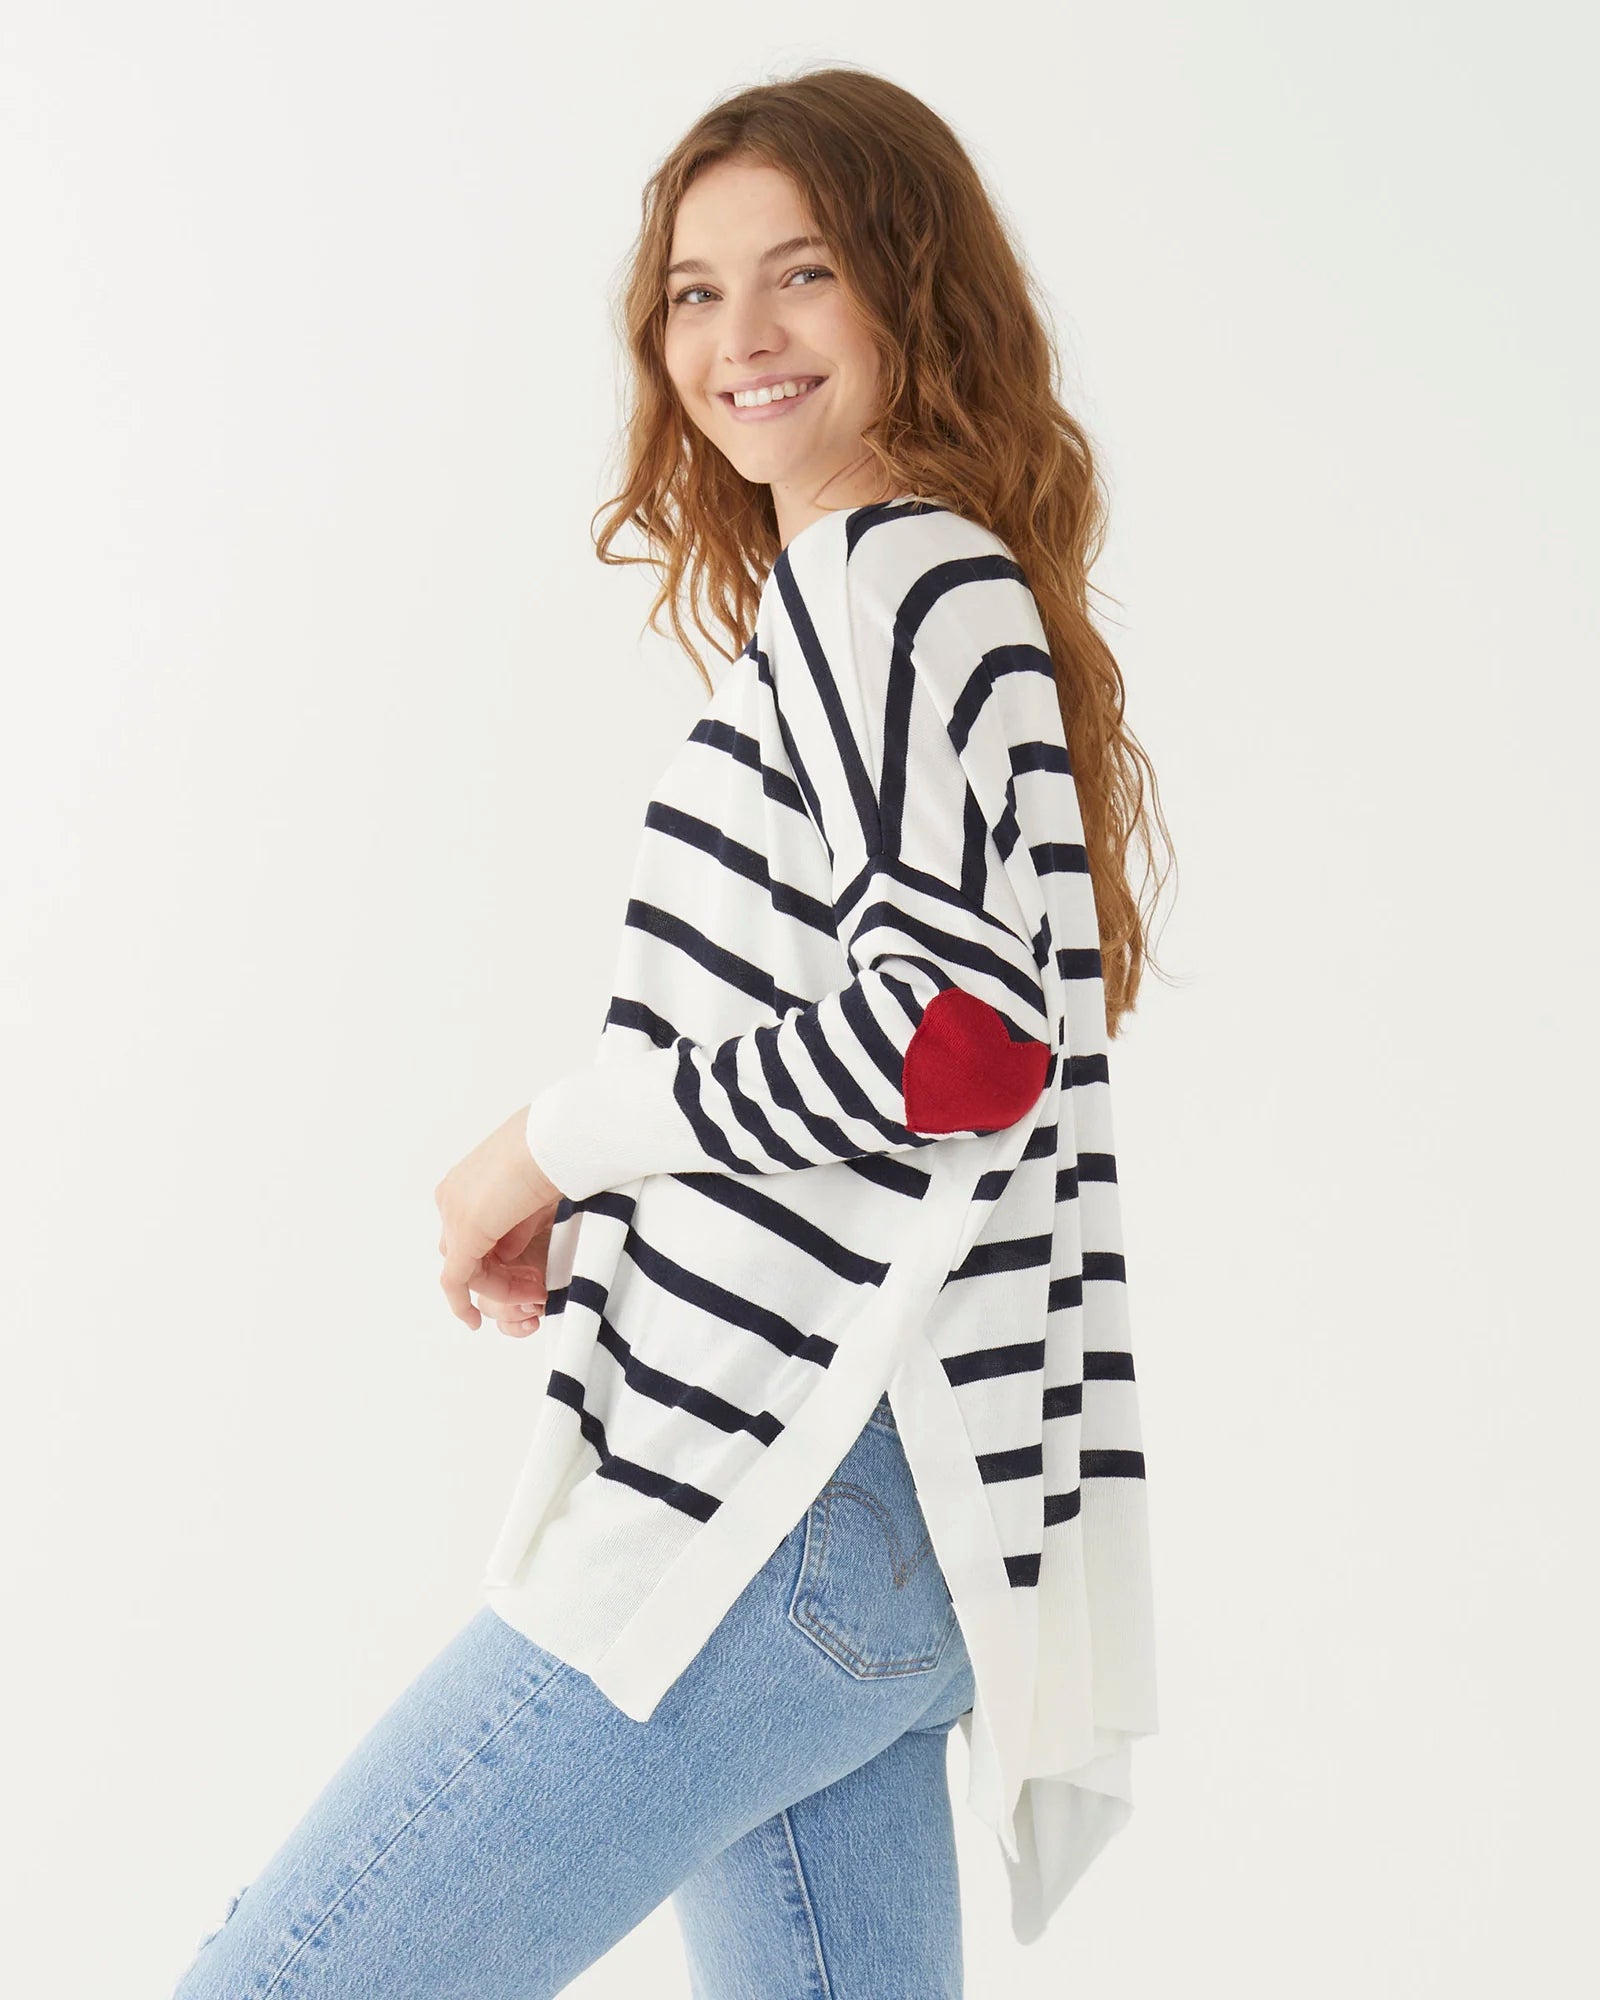 Amour Navy Striped Sweater by Mer Sea - Lifestyle Photo in Garden